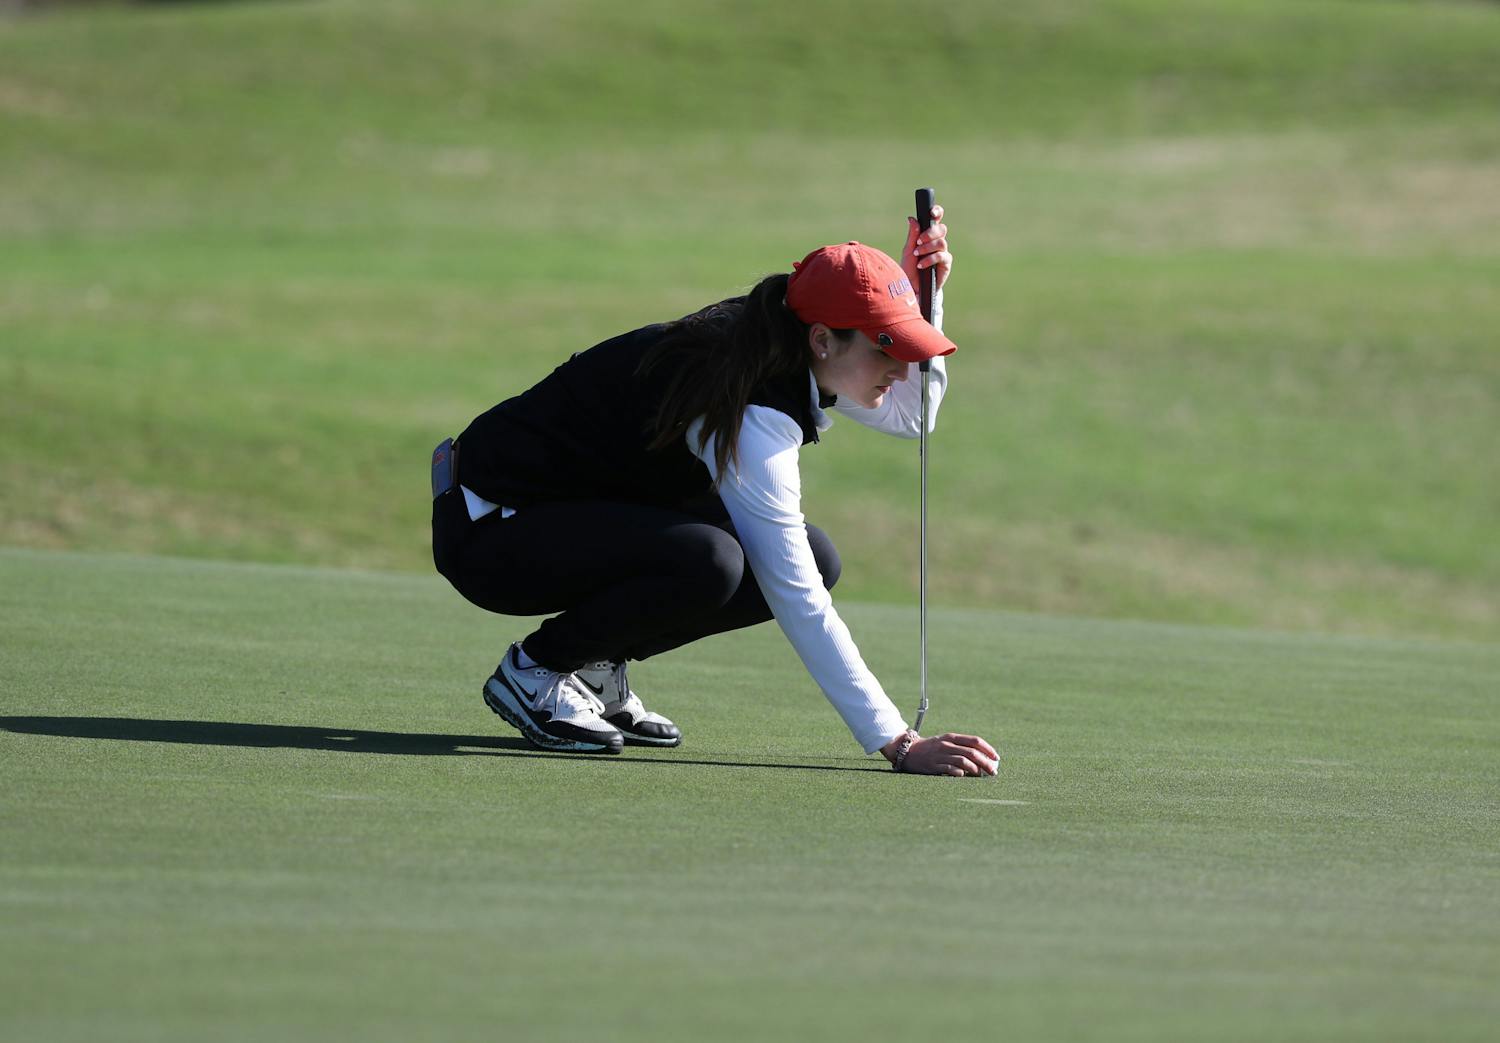 Florida Gators women&#x27;s golf on Sunday, February 21, 2021 at the Mark Bostick Golf Course in Gainesville, FL / UAA Communications photo by Alex de la Osa.